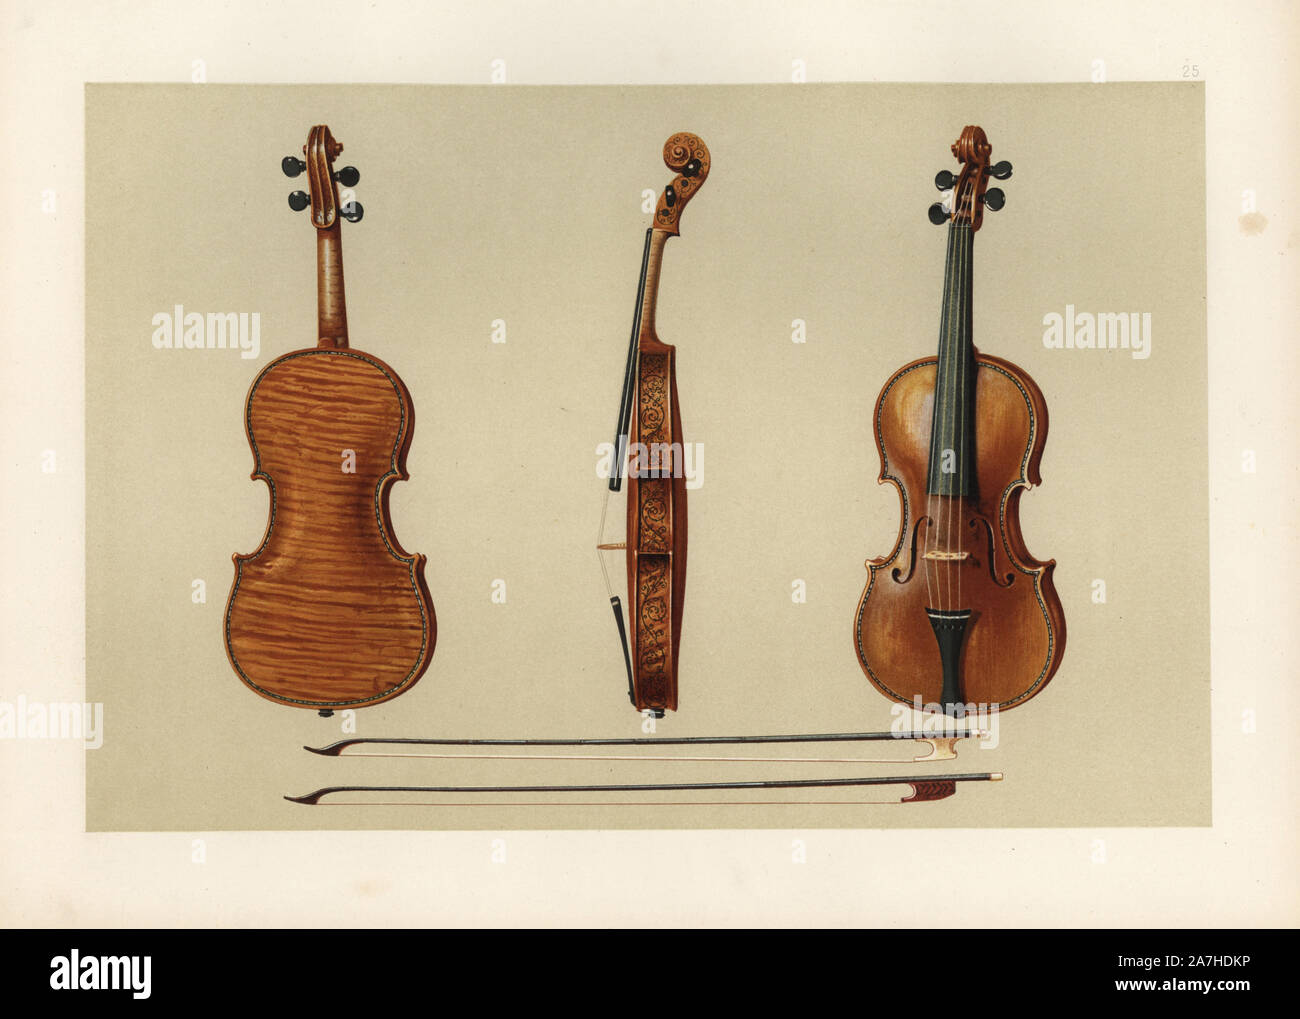 The violin bought by Sir Samuel Hellier in 1679 from the maker Antonius Stradivarius himself. Two old bows noted for their fluting beneath. Chromolithograph from an illustration by William Gibb from A.J. Hipkins' 'Musical Instruments, Historic, Rare and Unique,' Adam and Charles Black, Edinburgh, 1888. Alfred James Hipkins (1826-1903) was an English musicologist who specialized in the history of the pianoforte and other instruments. William Gibb was a master illustrator and chromolithographer and illustrated 'The Royal House of Stuart' (1890), 'Naval and Military Trophies' (1896), and others. Stock Photo